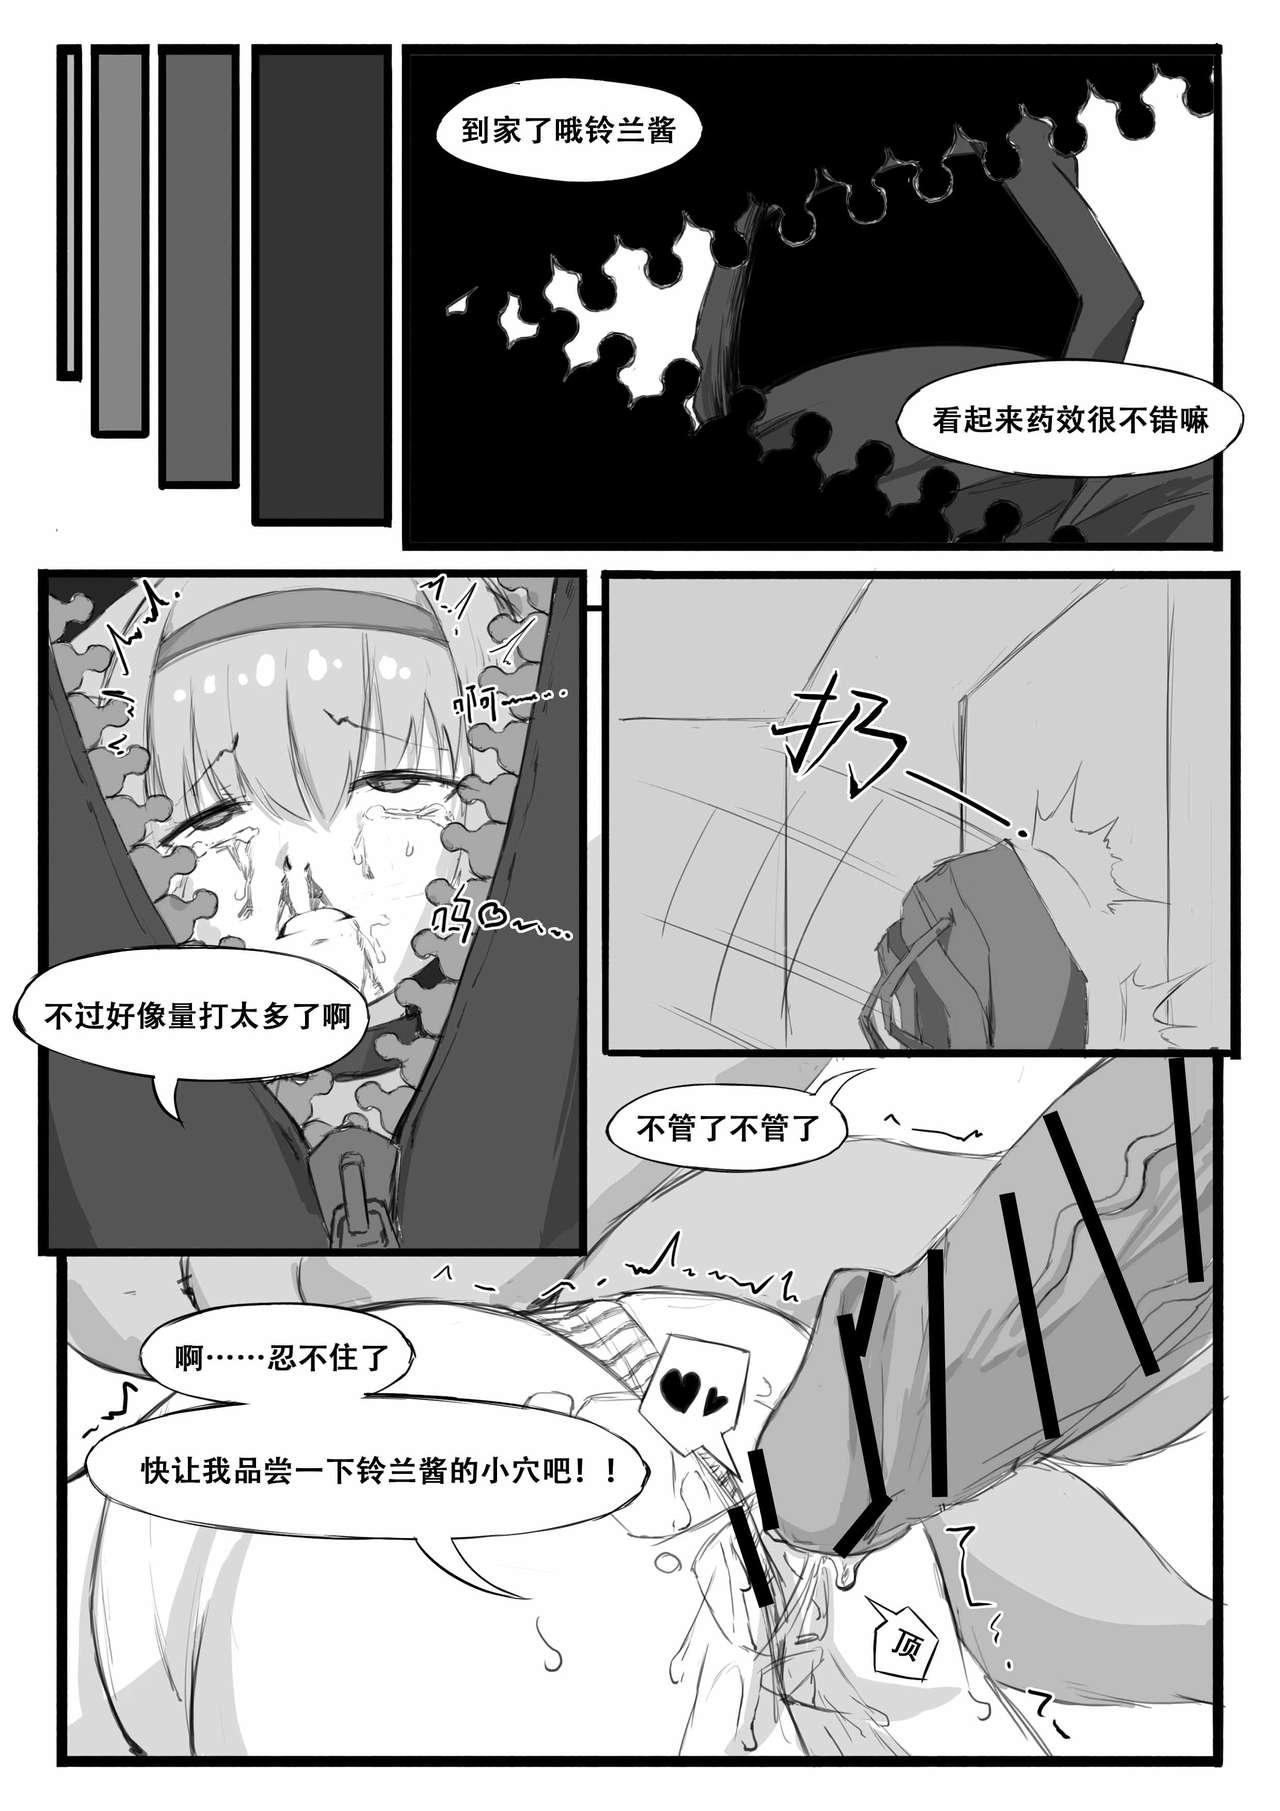 Step 铃兰的单人任务 - Arknights Wives - Page 13